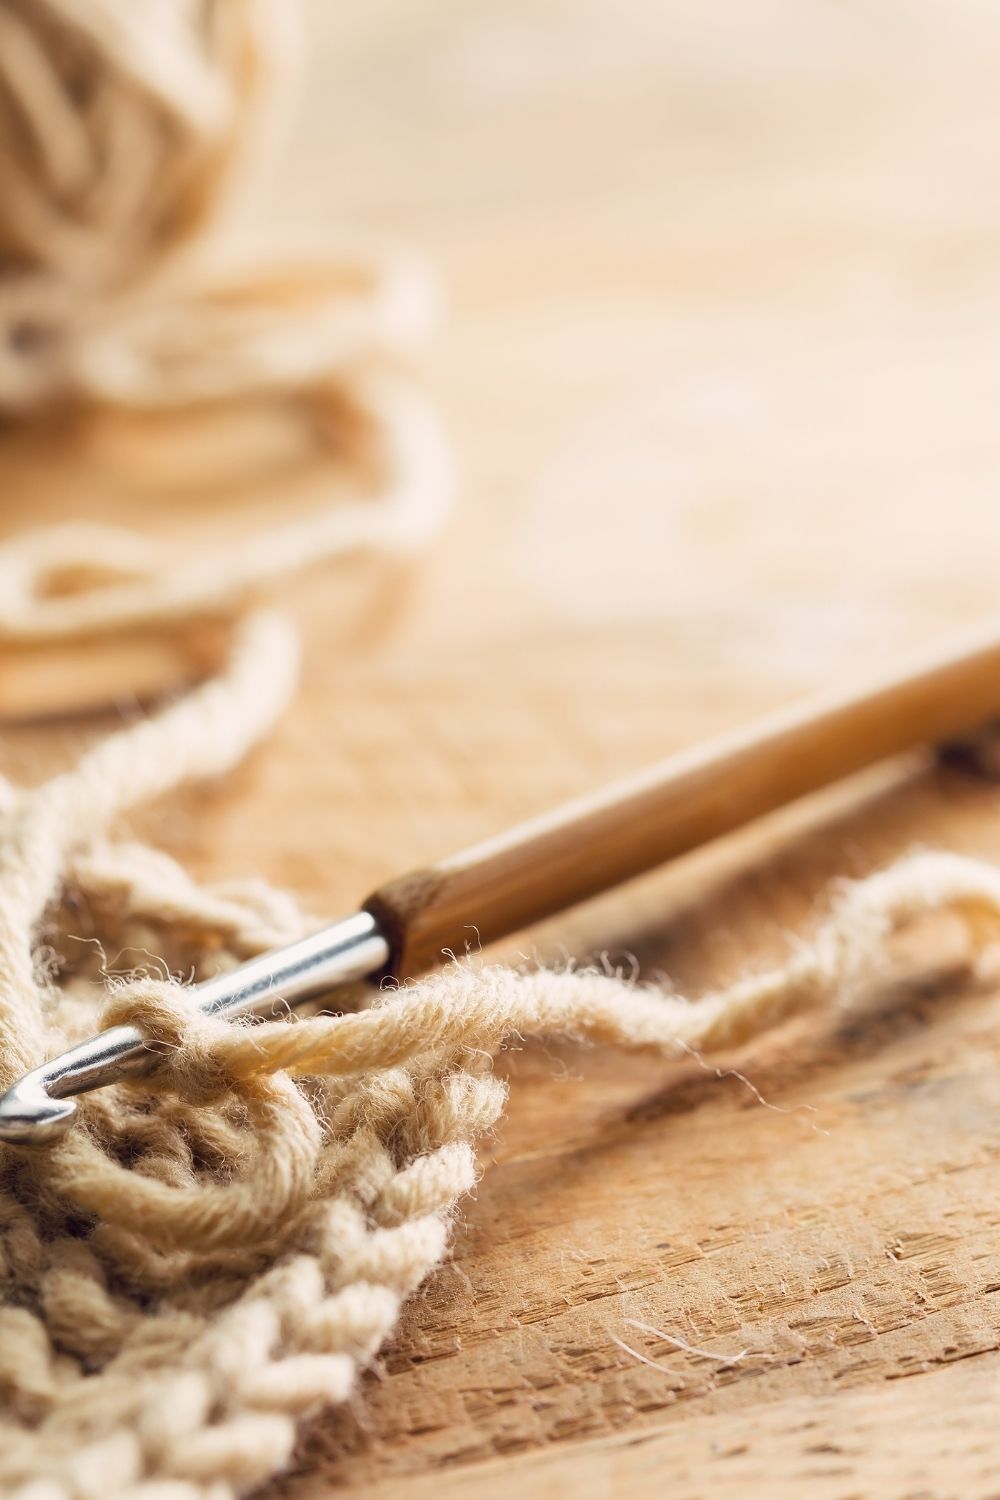 3 Annoying But Essential Tasks to Do While Crocheting